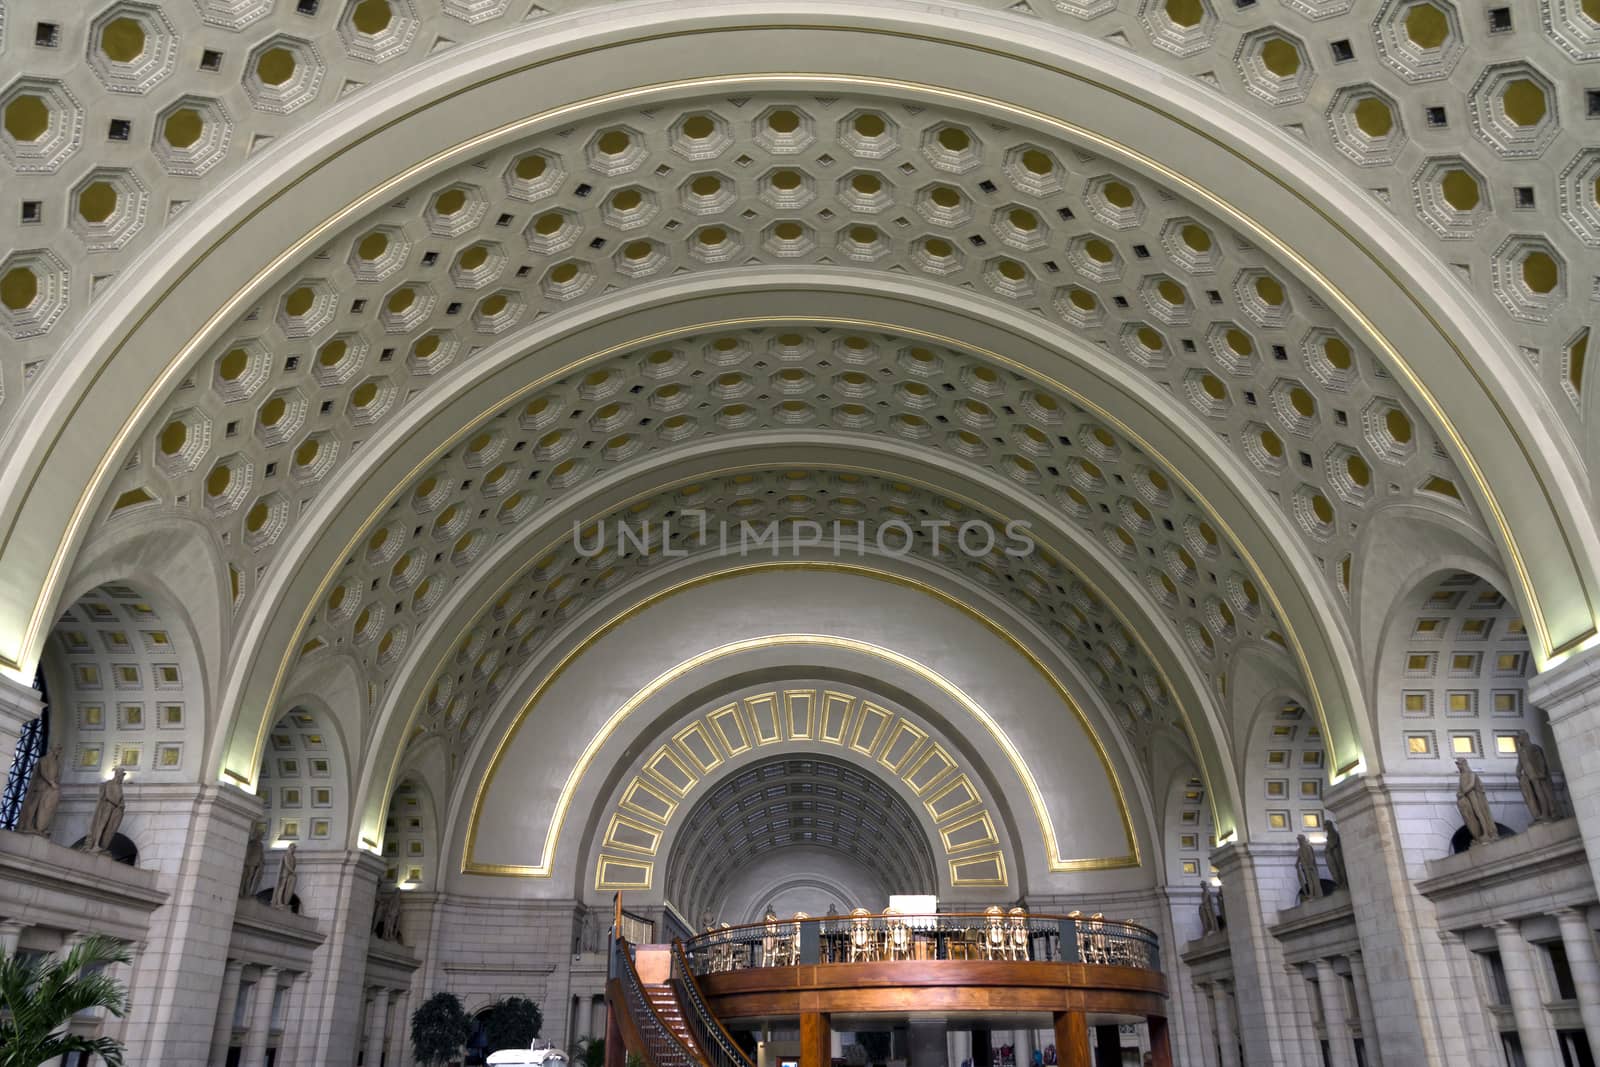 Union Station Interior by Moonb007